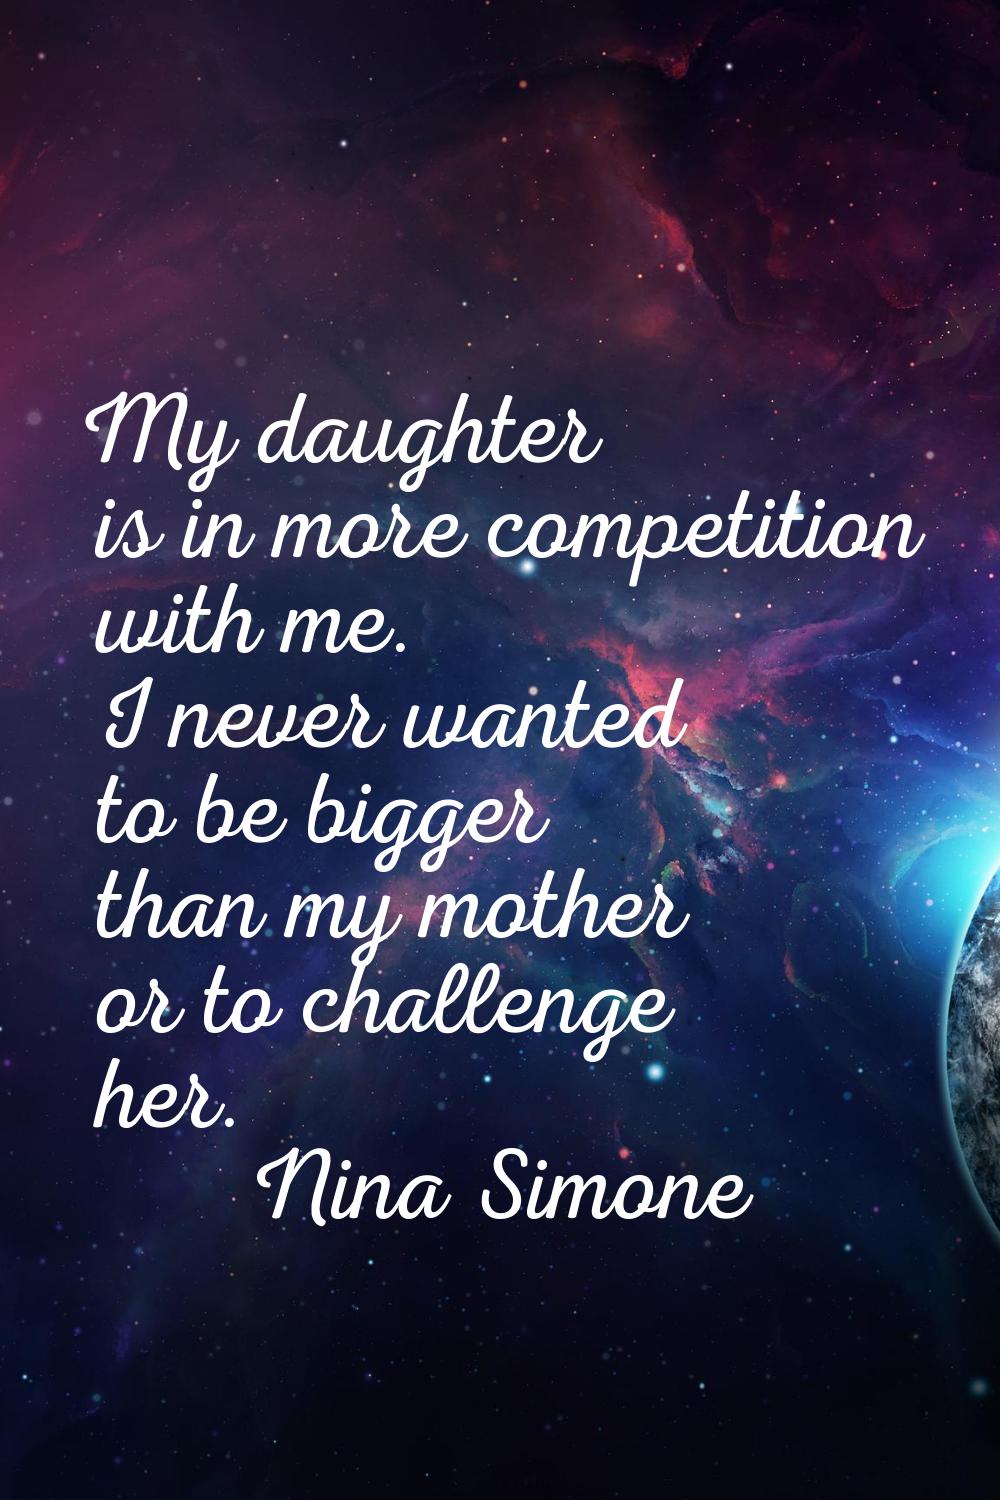 My daughter is in more competition with me. I never wanted to be bigger than my mother or to challe